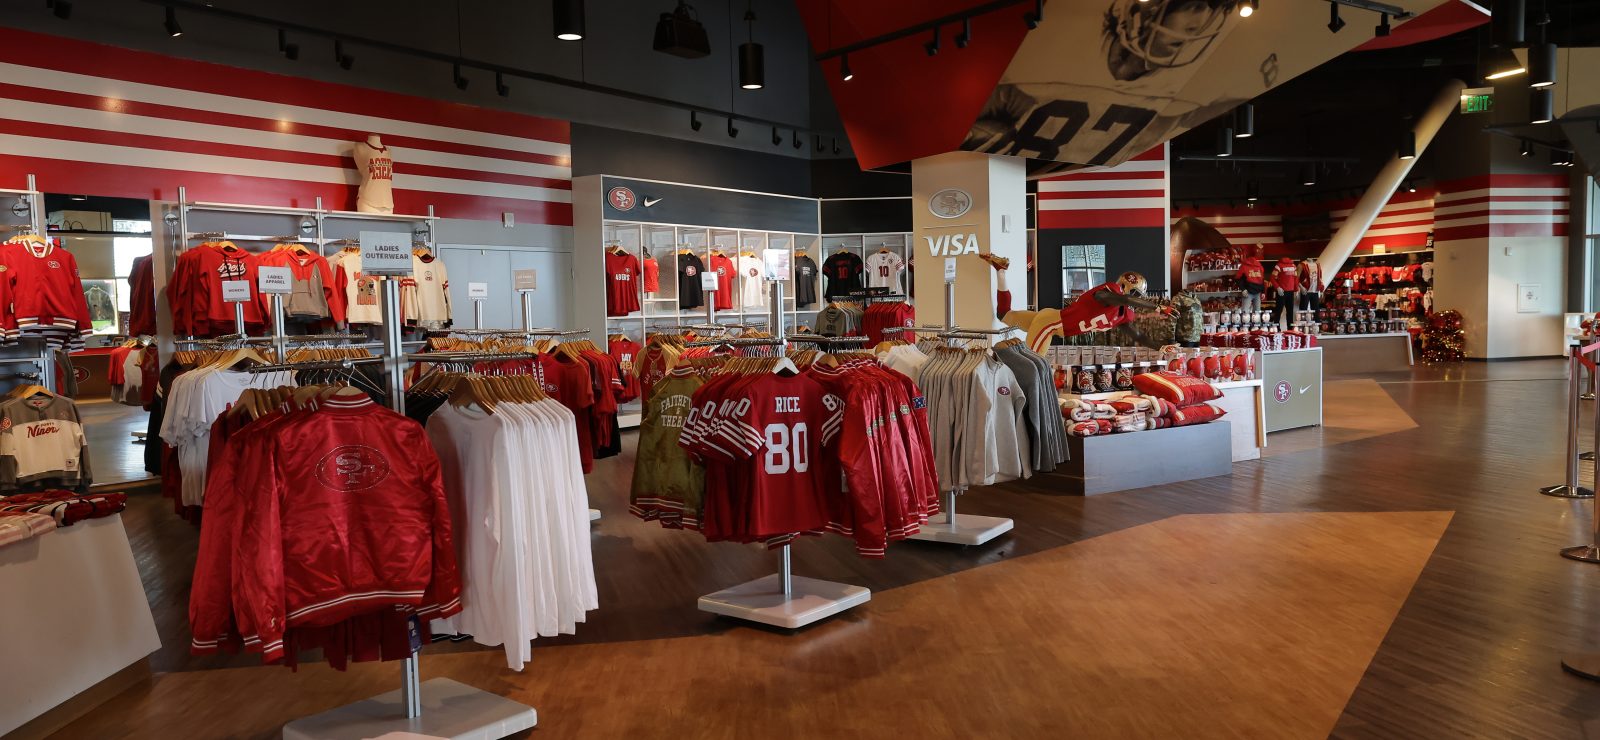 49ers store westfield mall